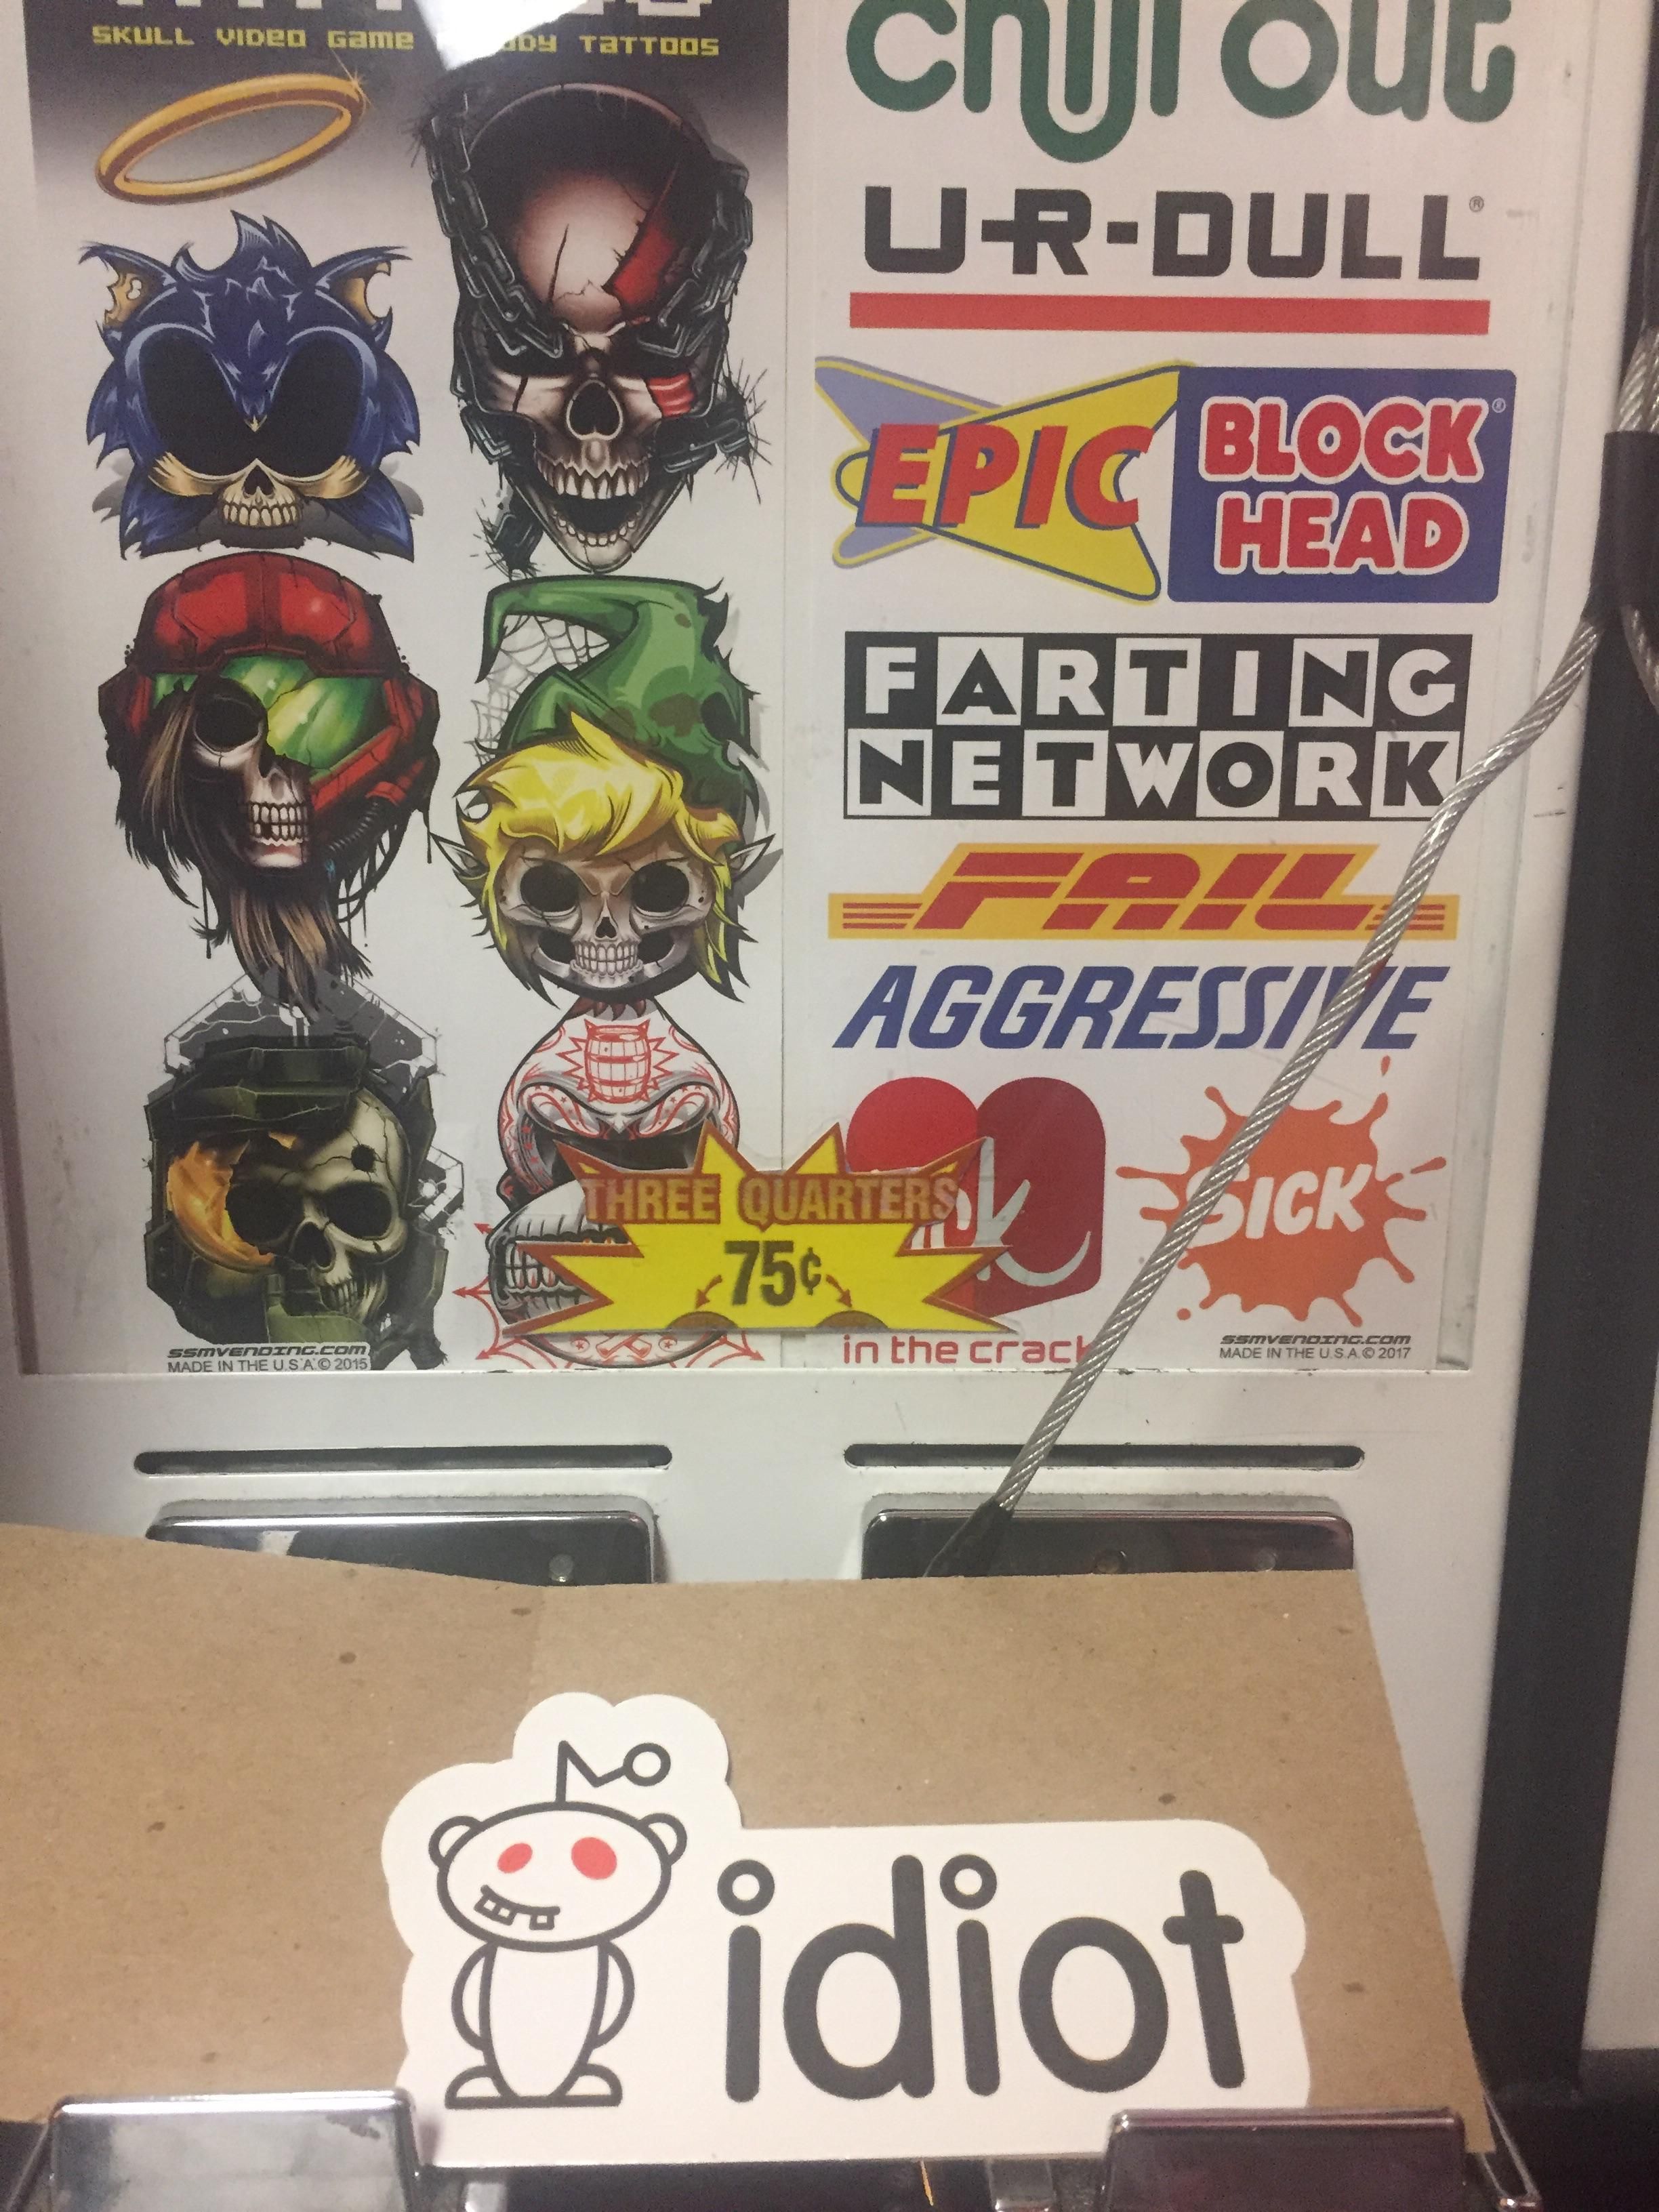 The sticker I got out of this machine at a Mexican restaurant.